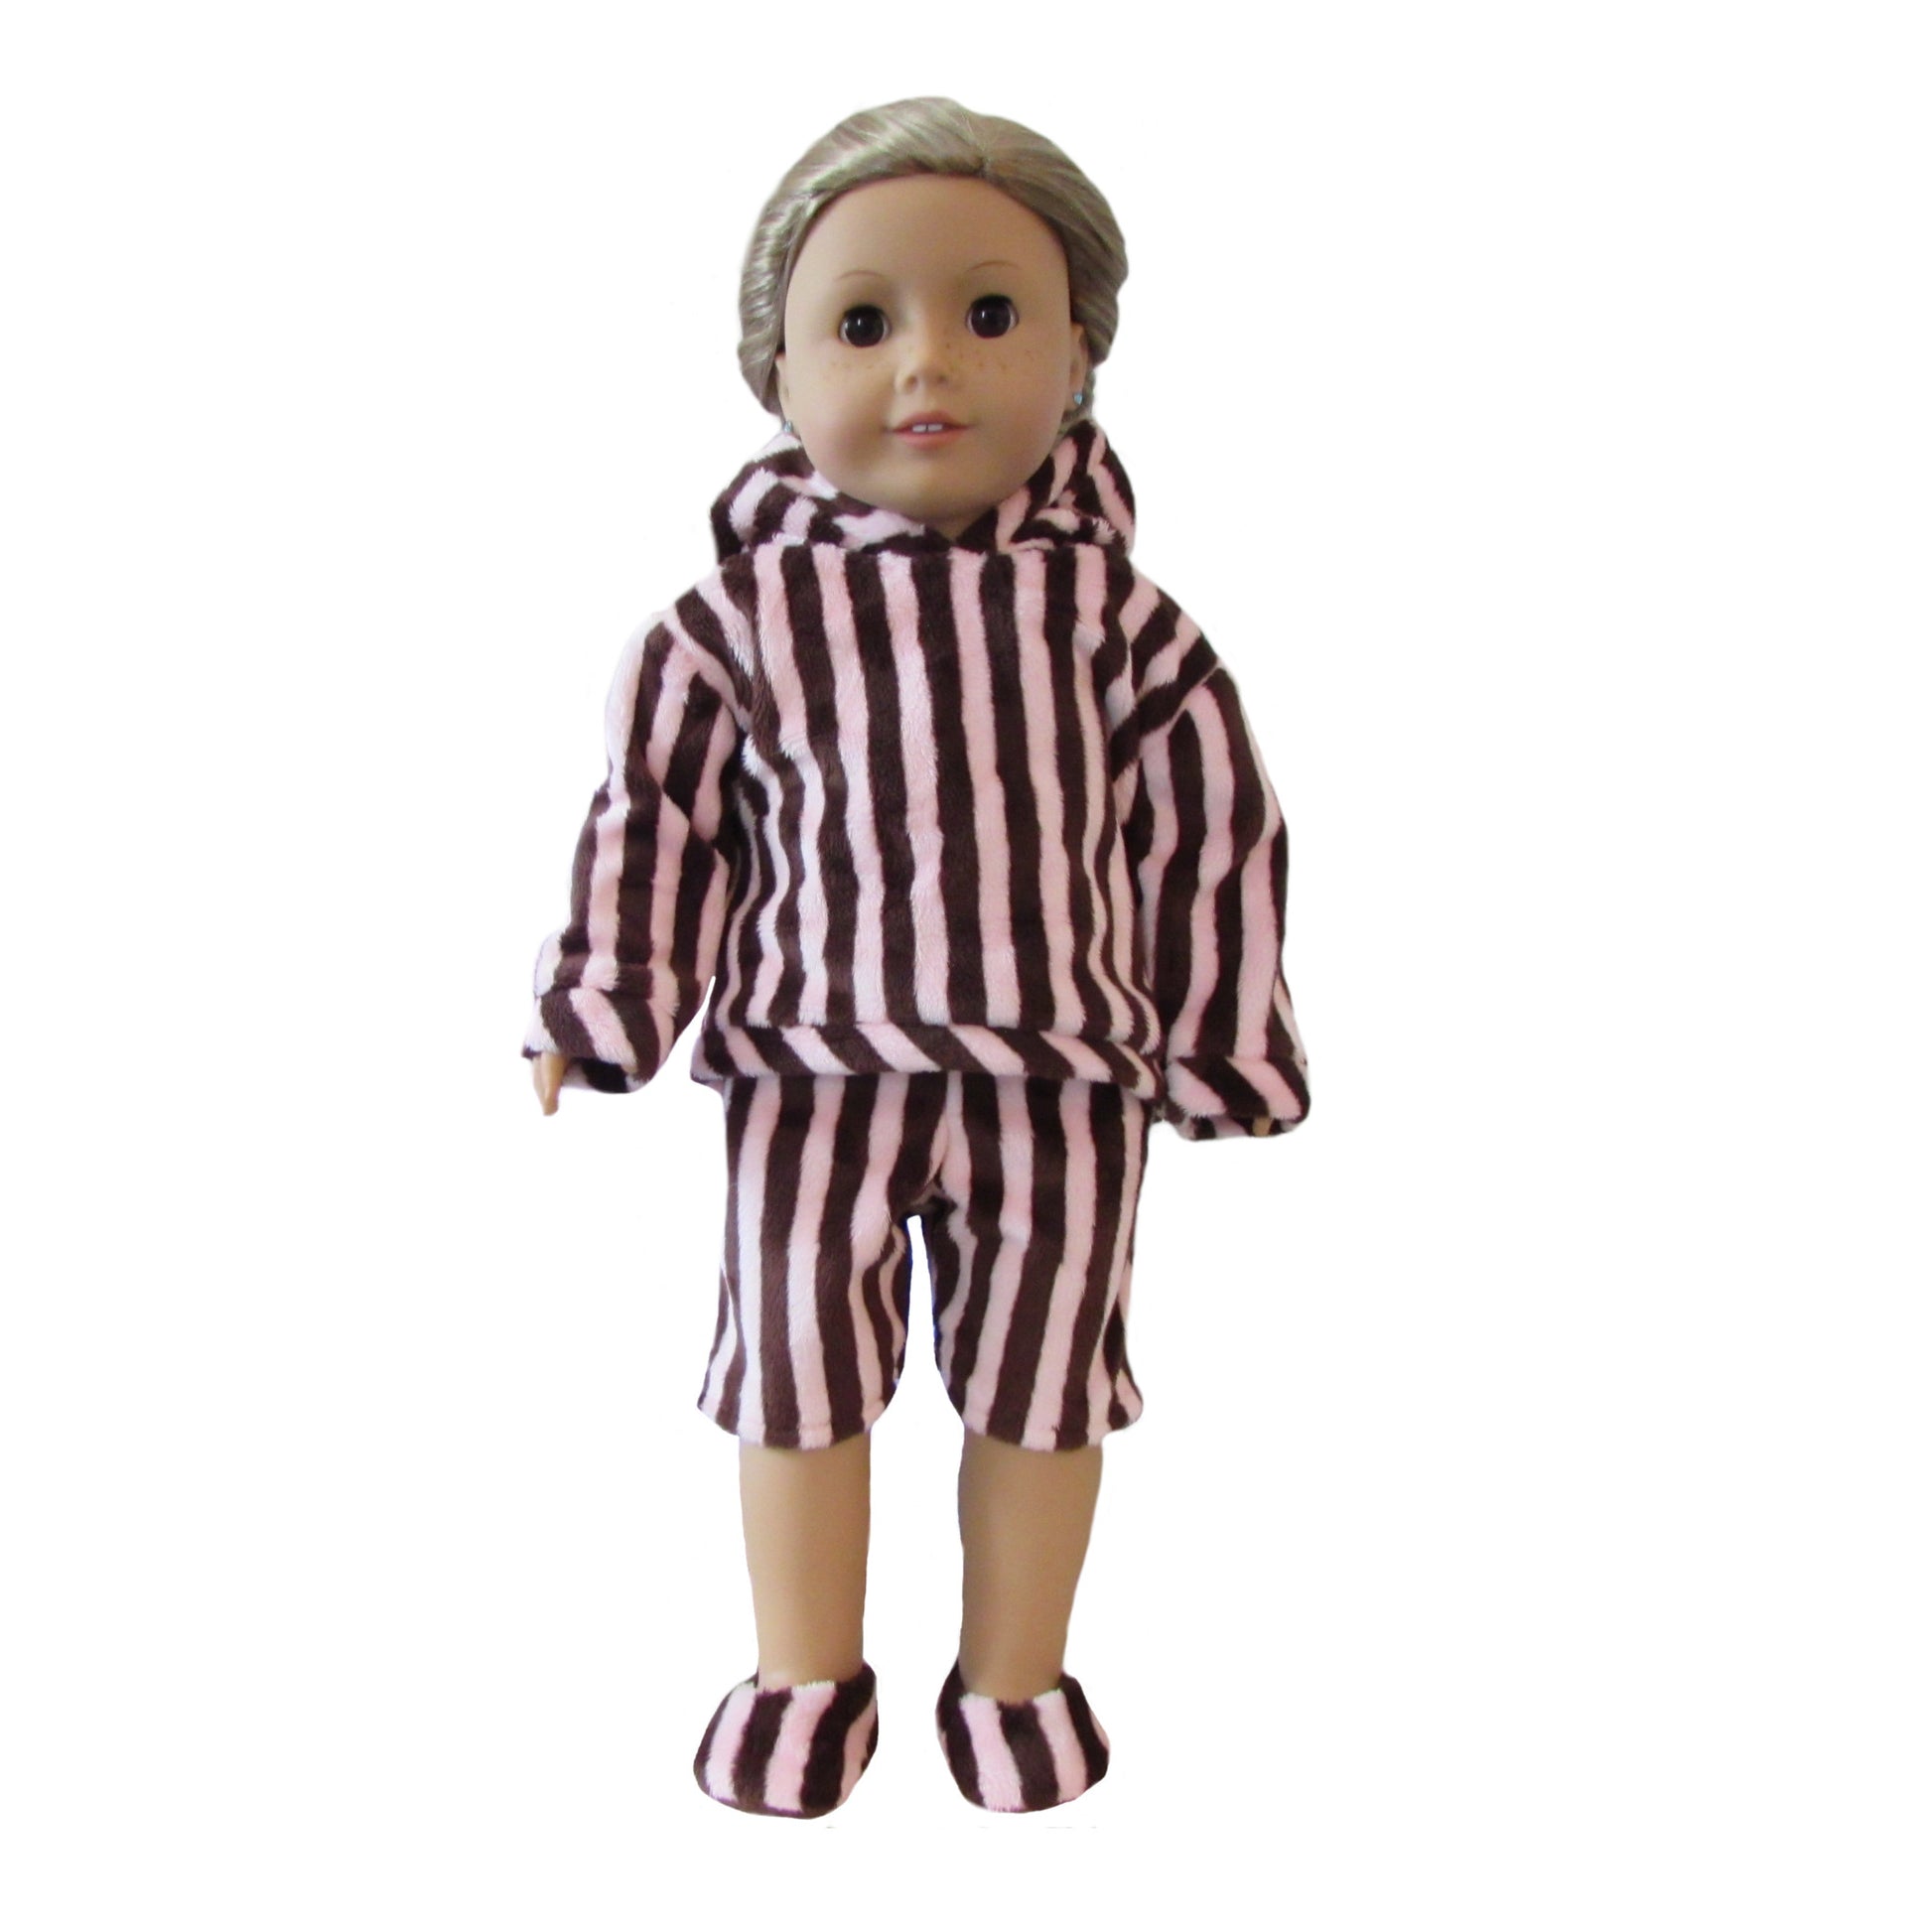 Pink and Brown Minky Cuddle Striped Doll Hoodie, Shorts, and Slippers for 18-inch dolls